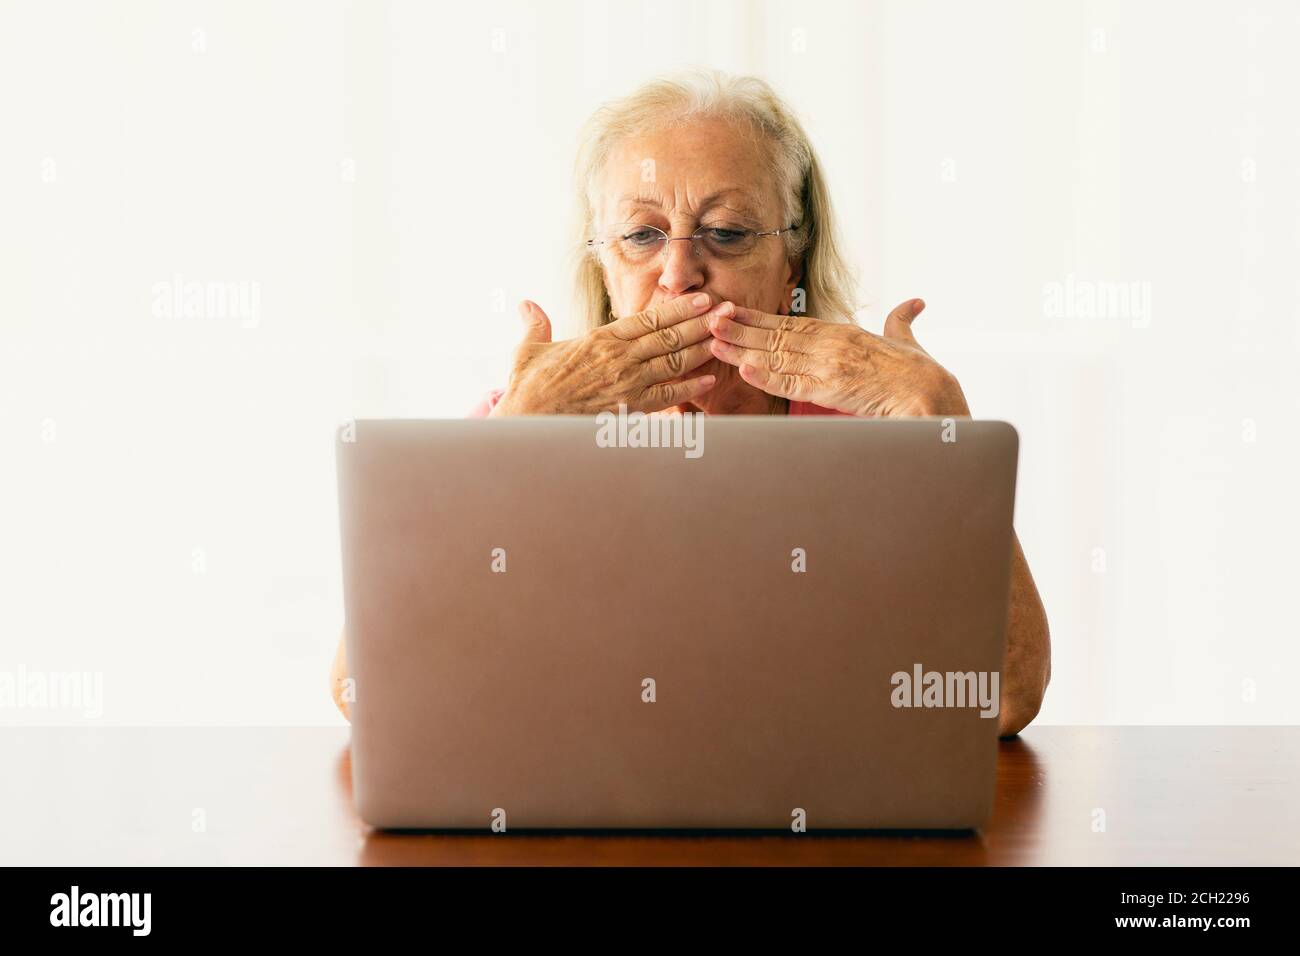 Senior woman using laptop and having an on-line conversation Stock Photo